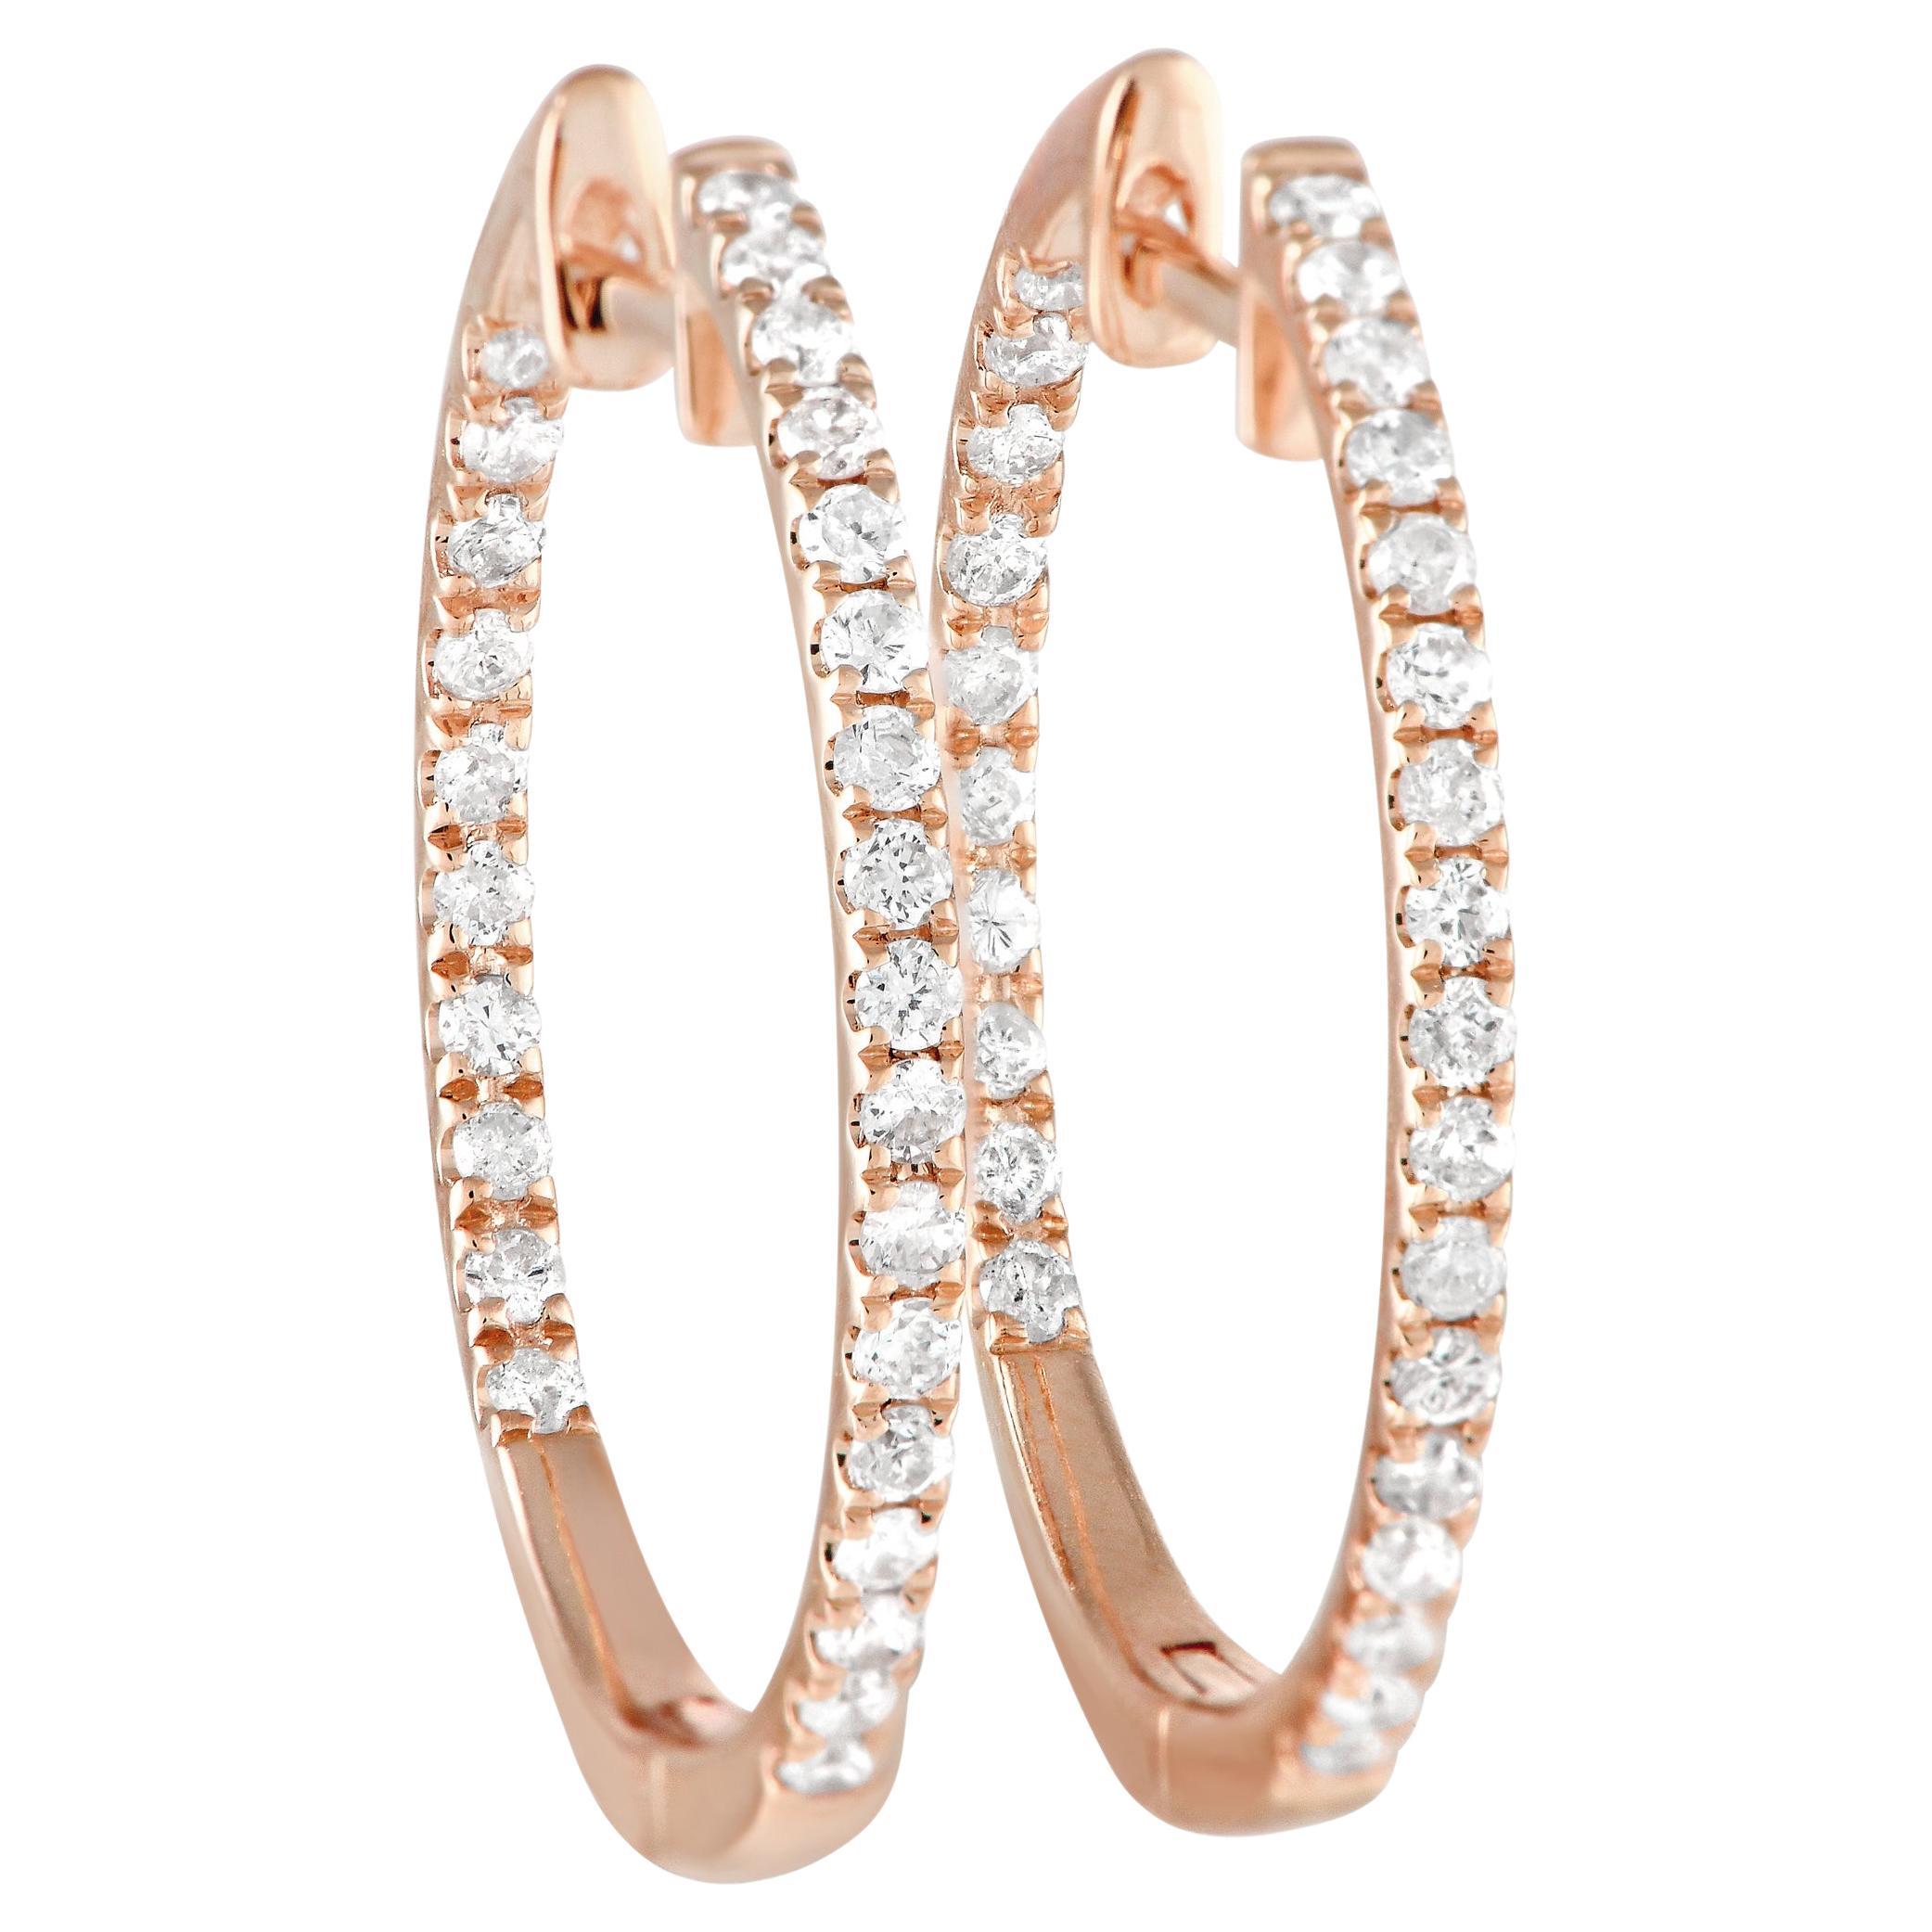 Lb Exclusive 14k Rose Gold 0.50 Carat Diamond Inside-Out Hoop Earrings For Sale